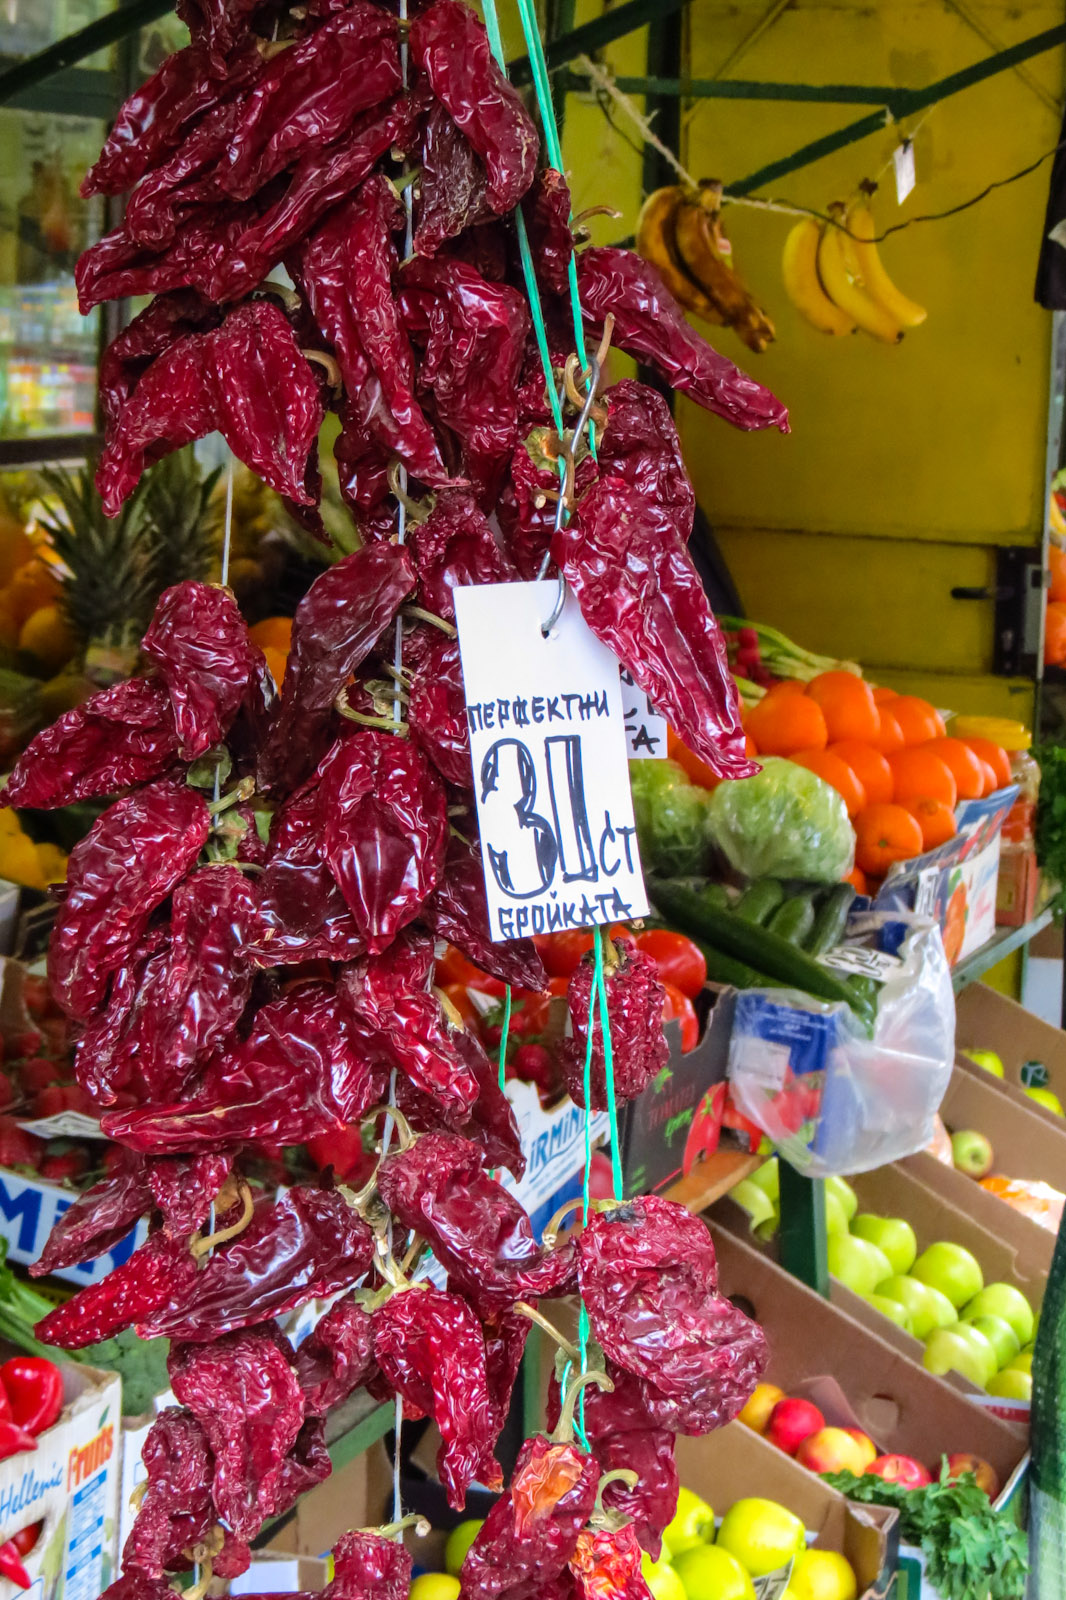 peppers-at-market-sofia